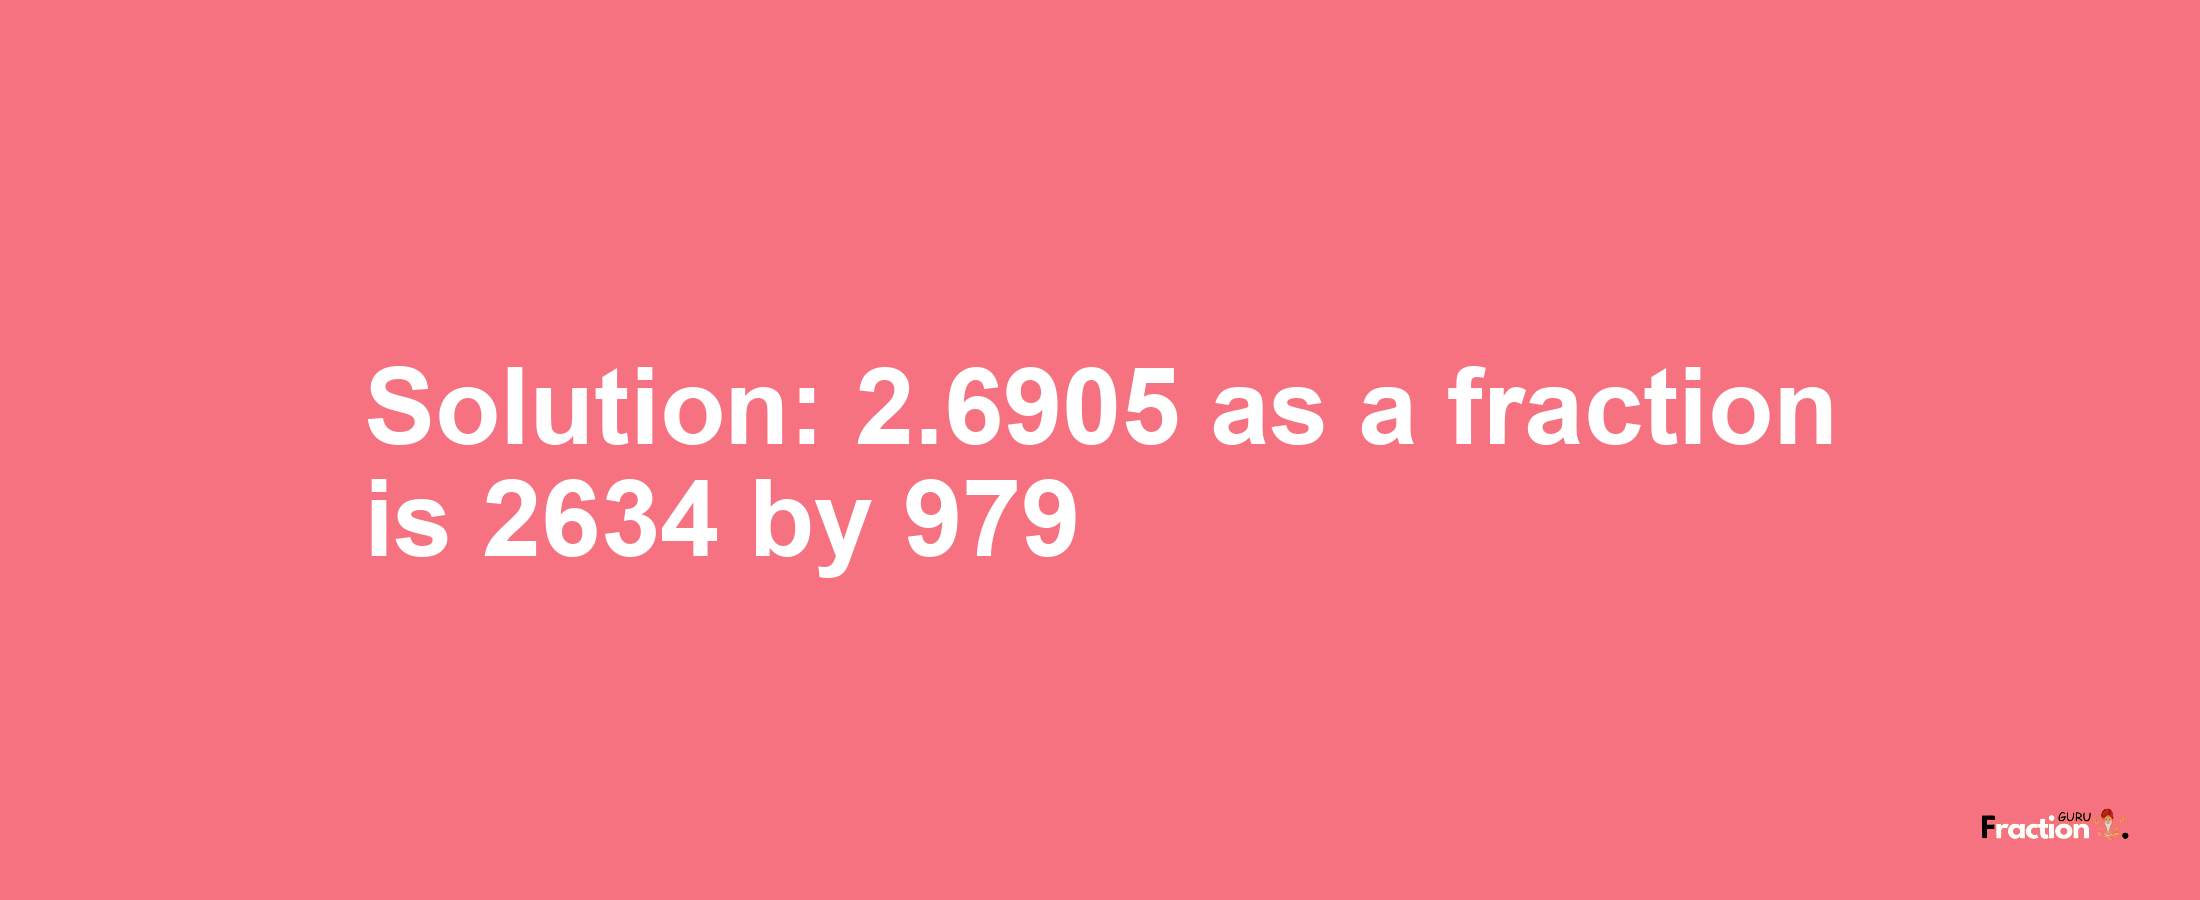 Solution:2.6905 as a fraction is 2634/979